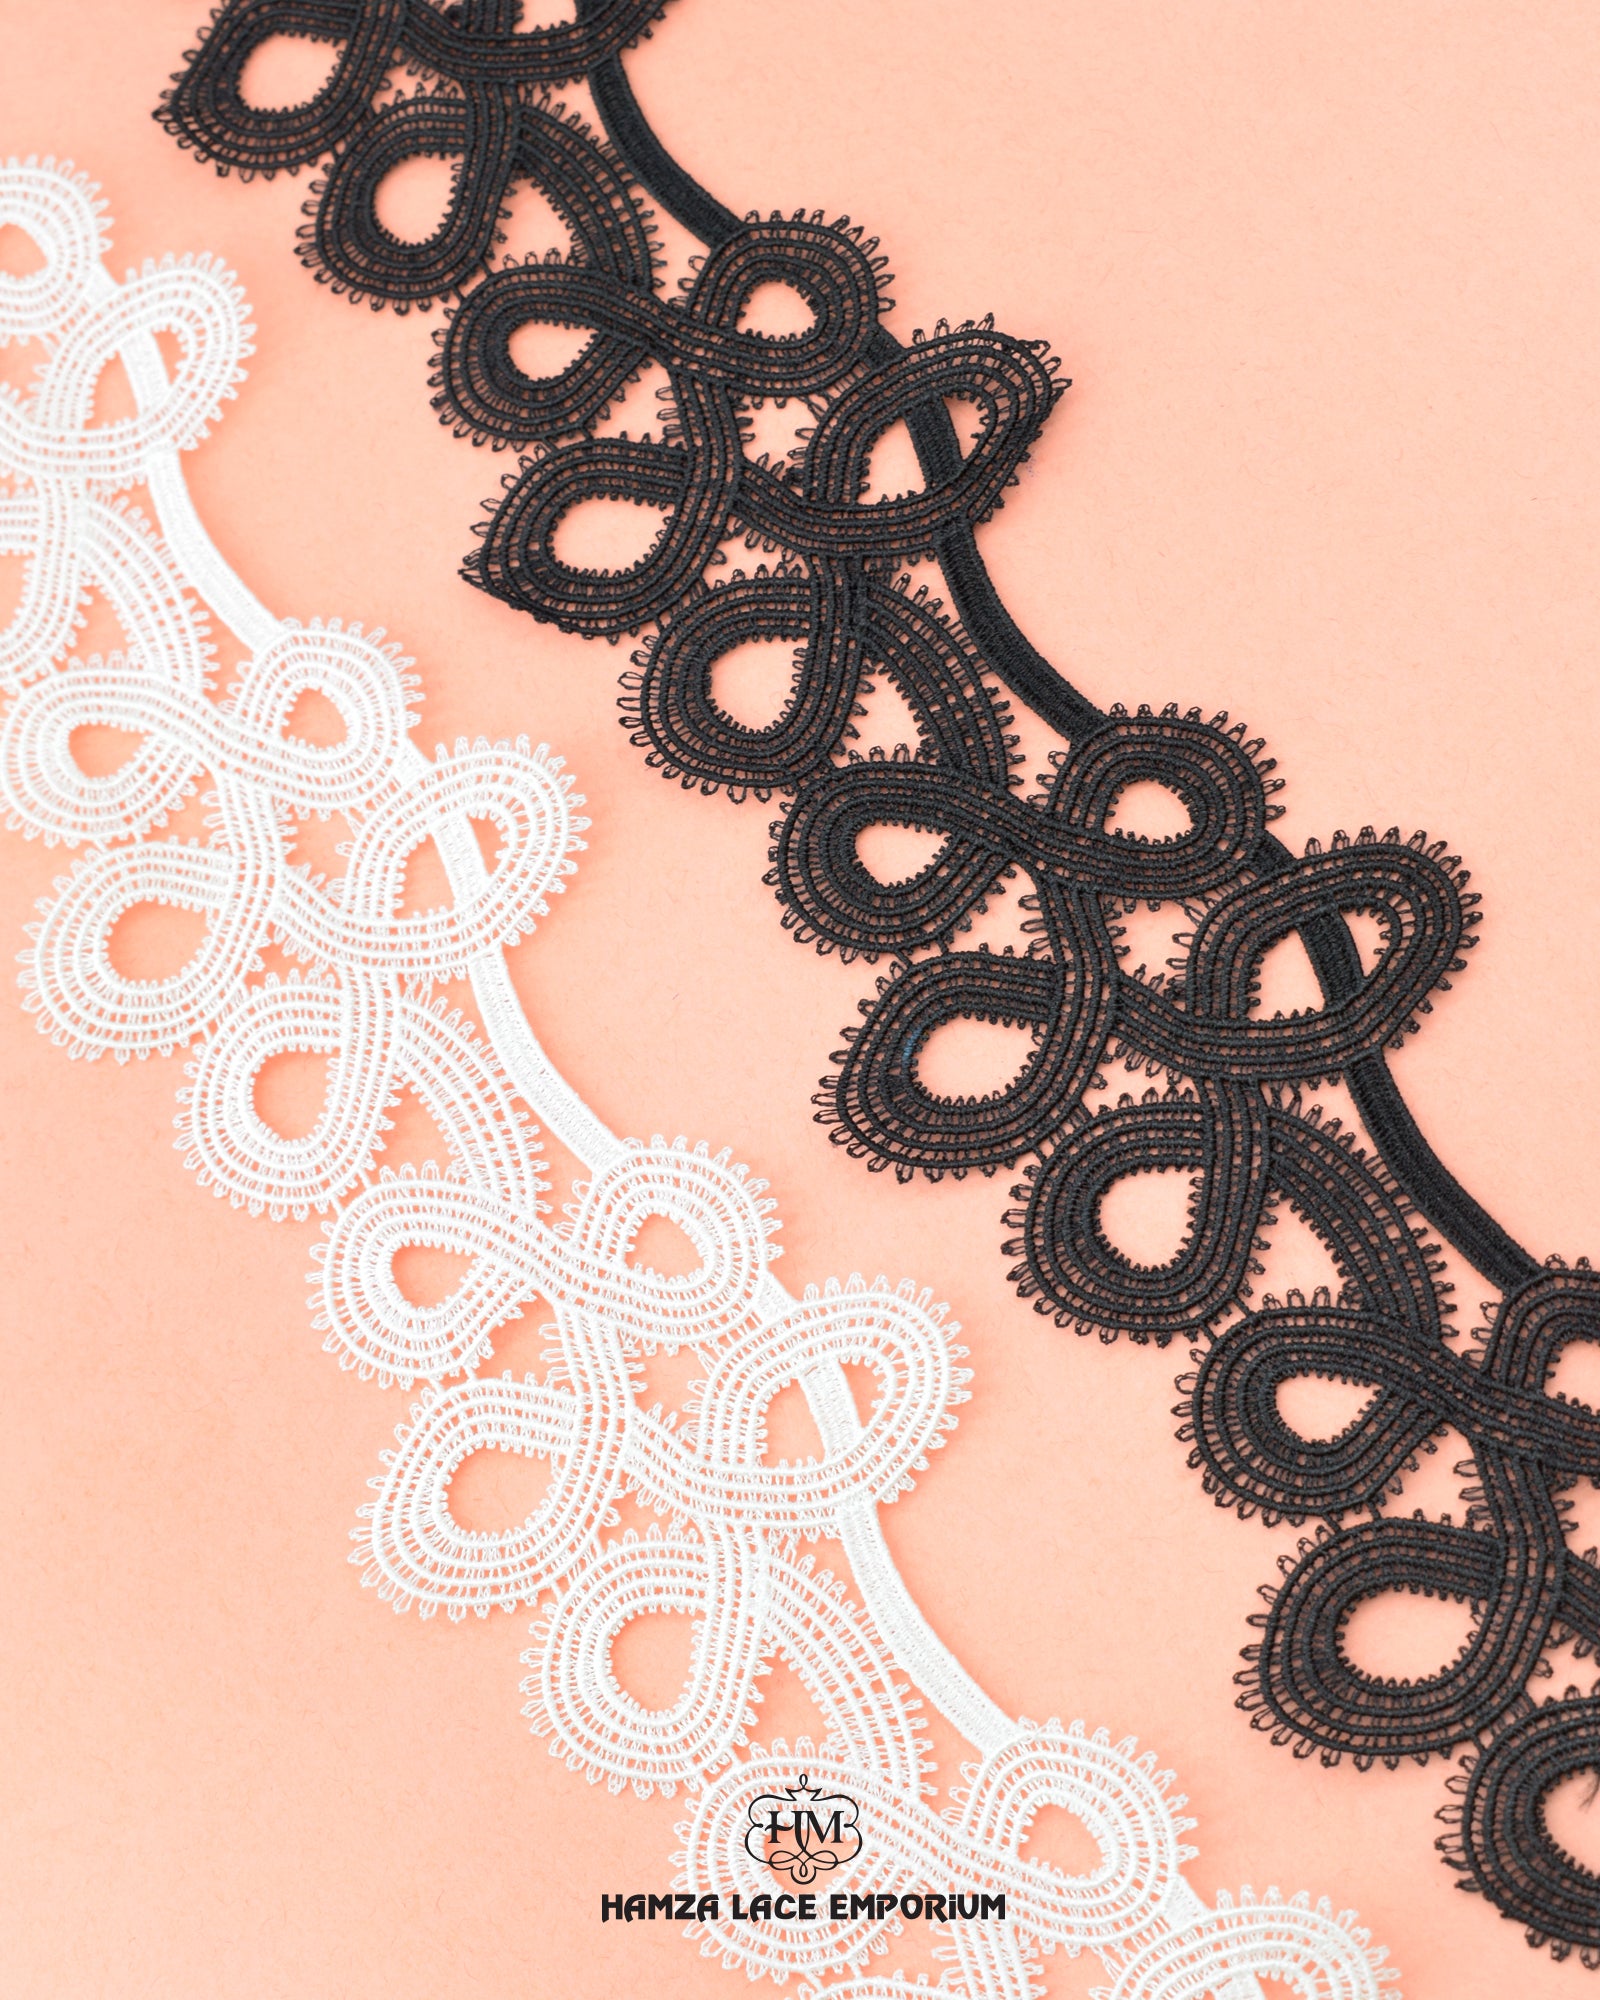 One White and one black piece of the 'Center Scallop Lace 22980' are arranged in a row and the brand name 'Hamza Lace' and the logo is printed at the bottom